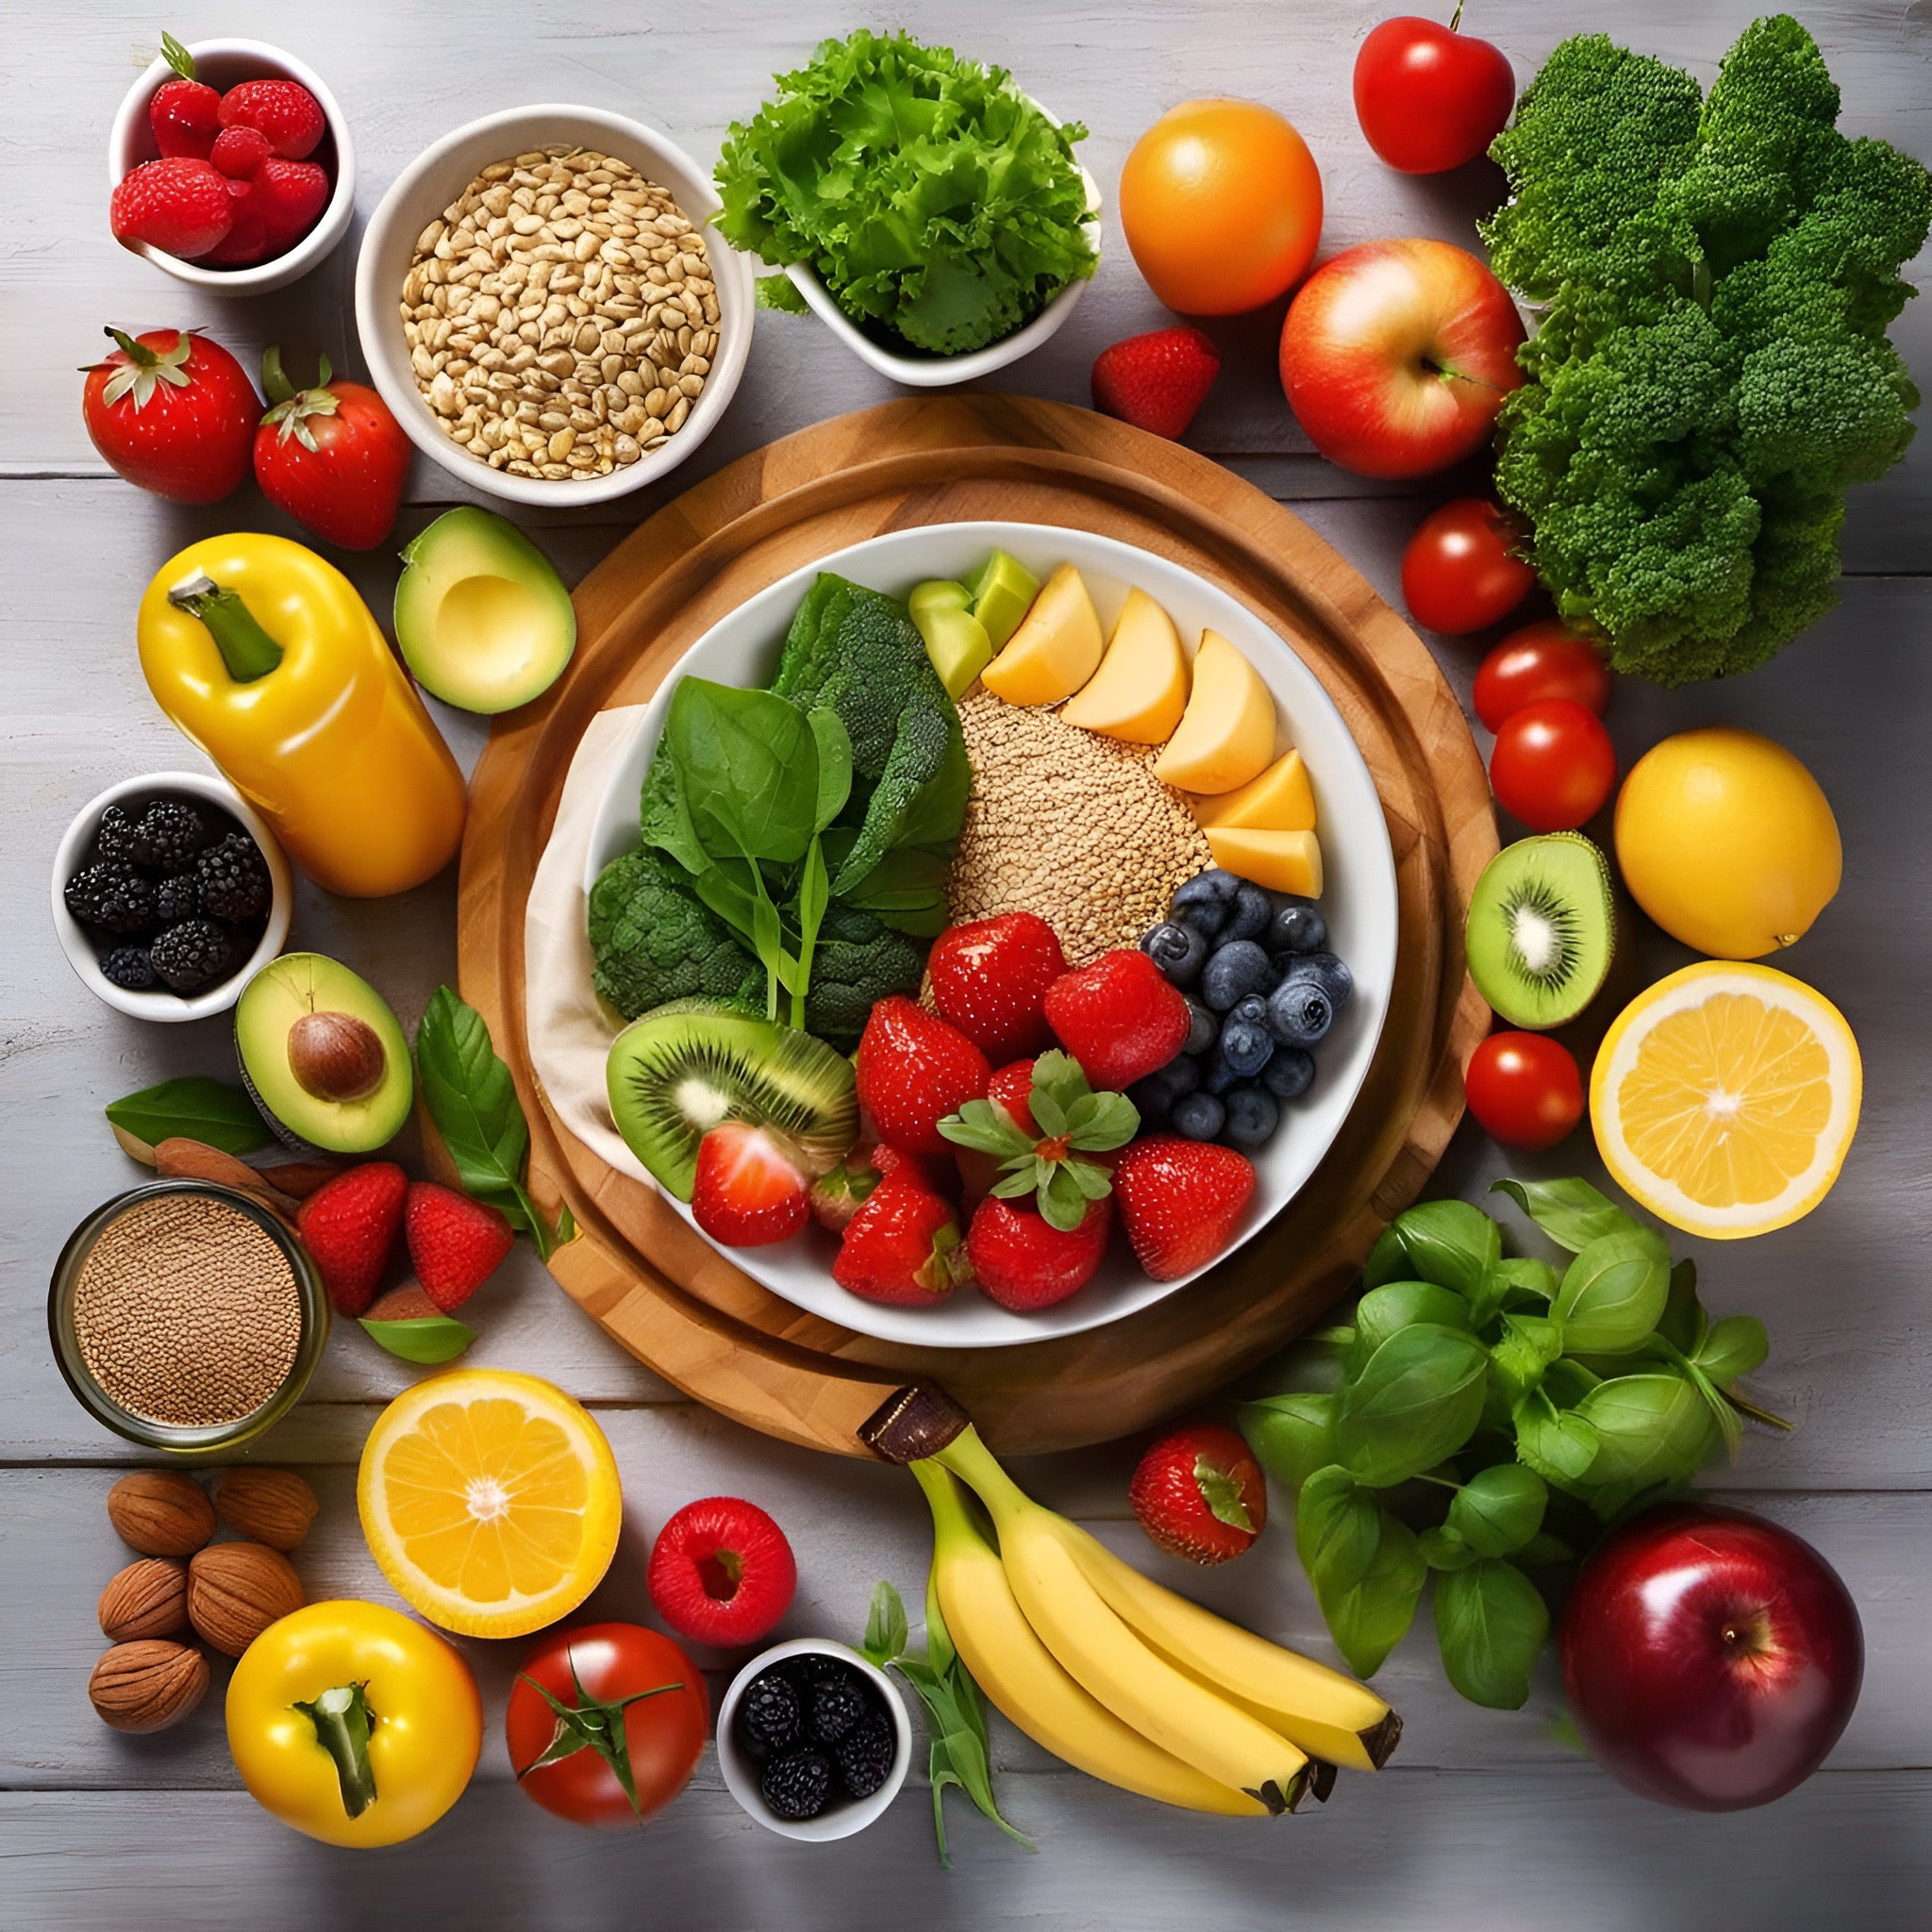 Achieving Optimal Nutrition: The Key to a Balanced Diet